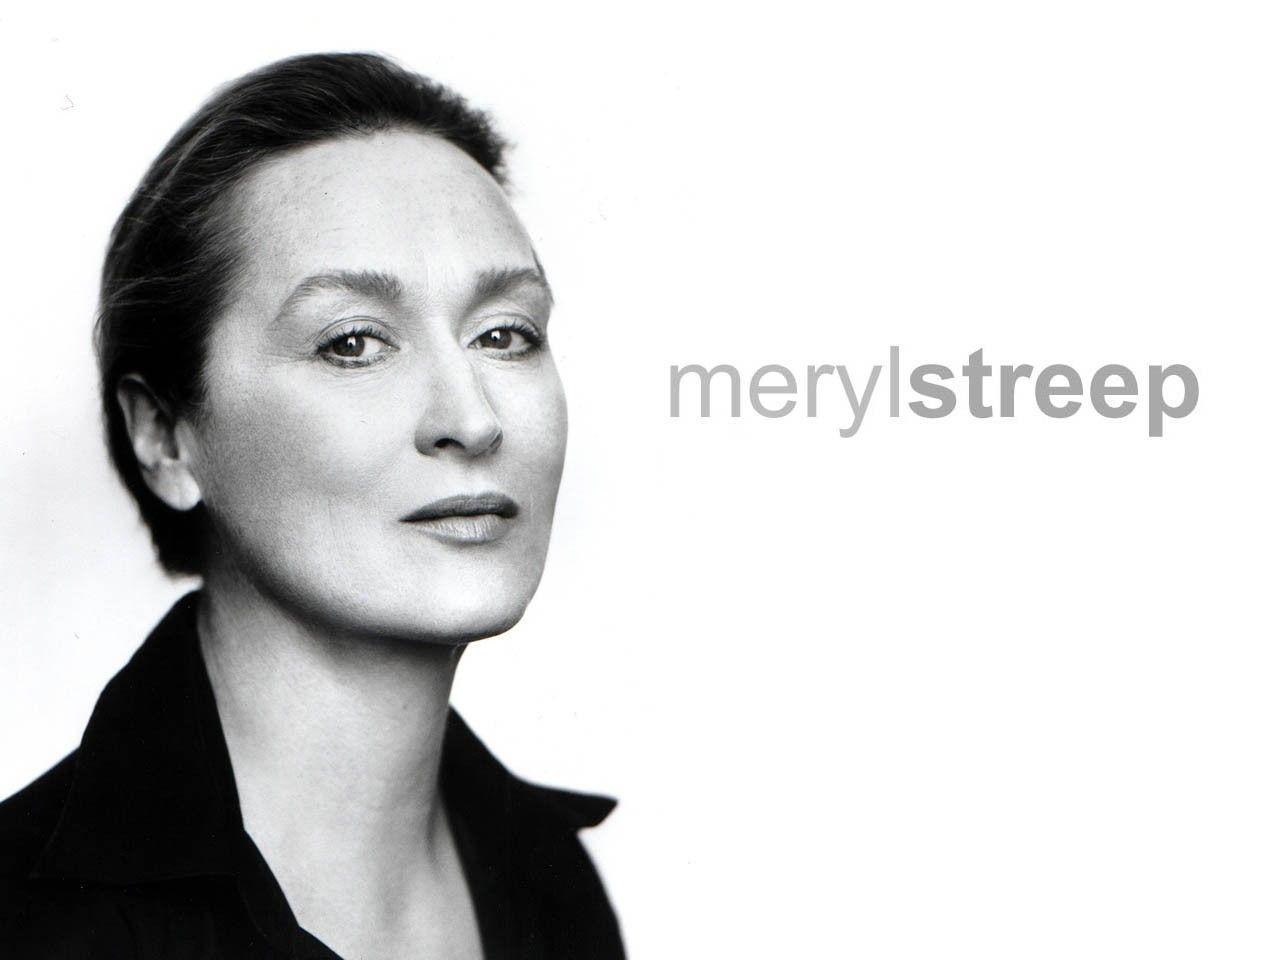 image about Meryl Streep. Colin firth, Jim